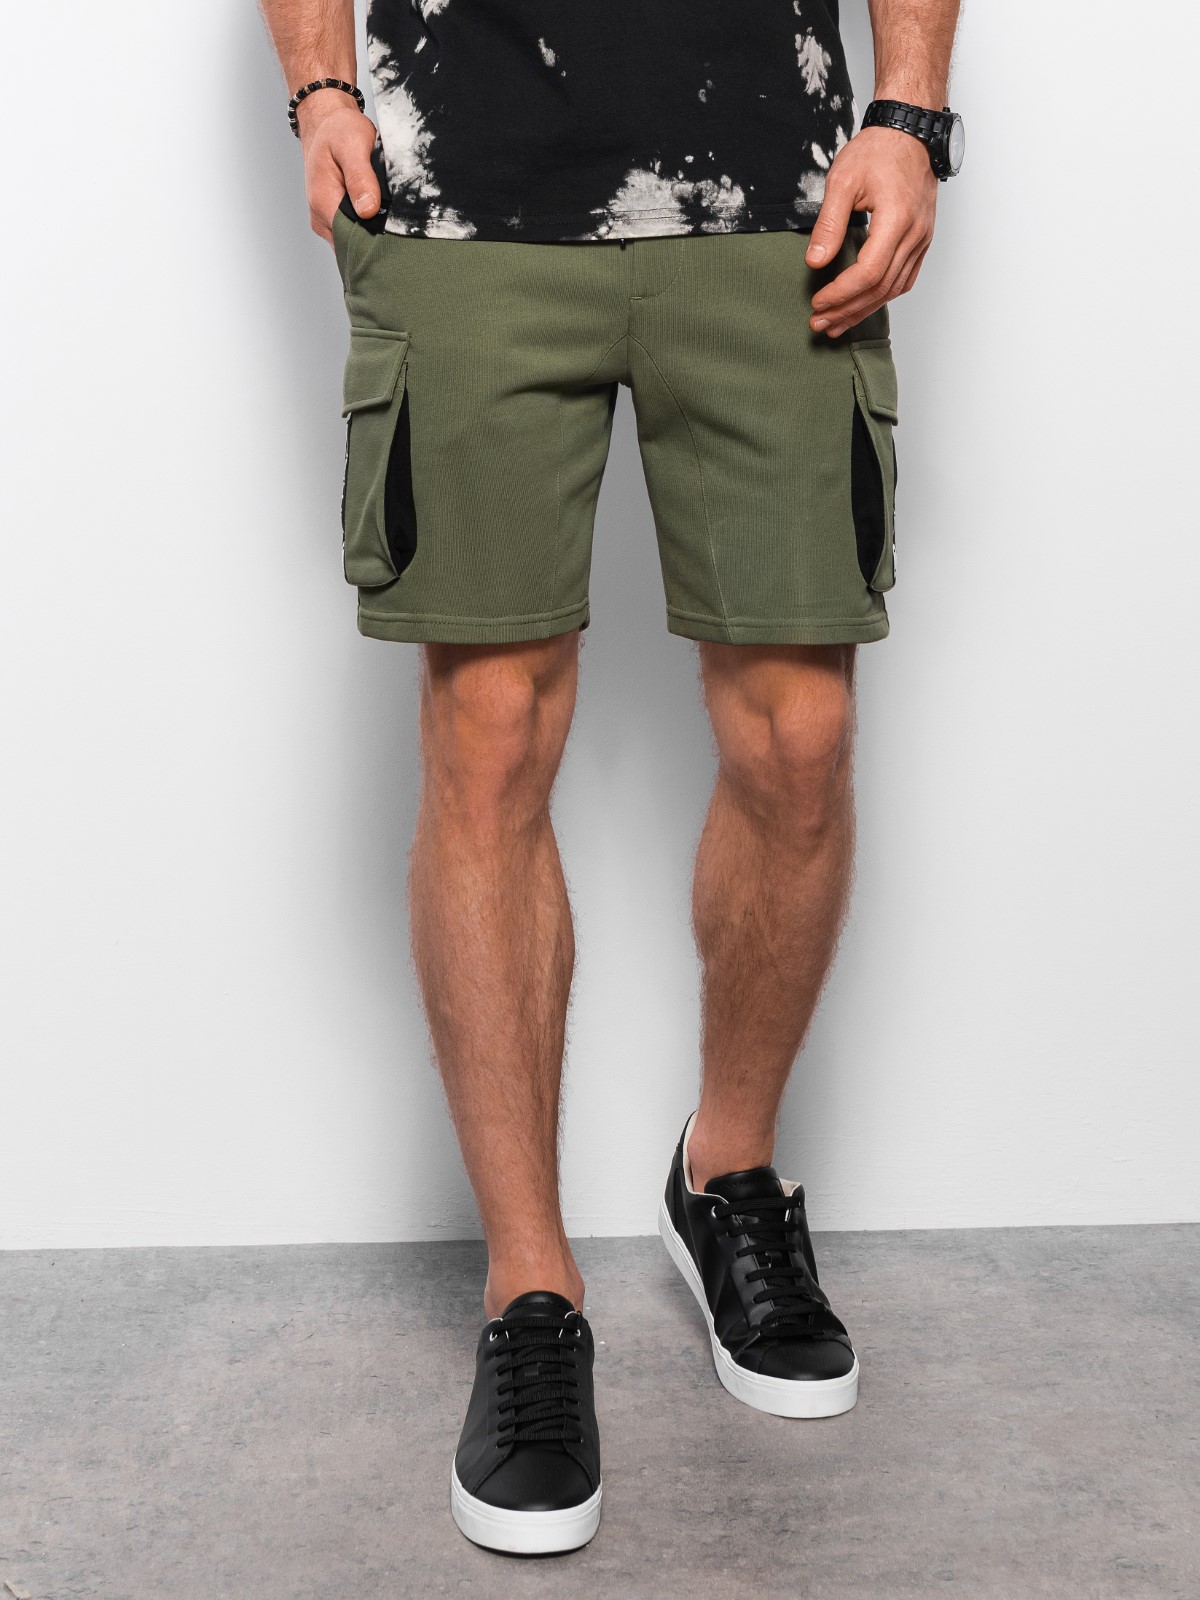 Ombre Men's shorts with cargo pockets - olive